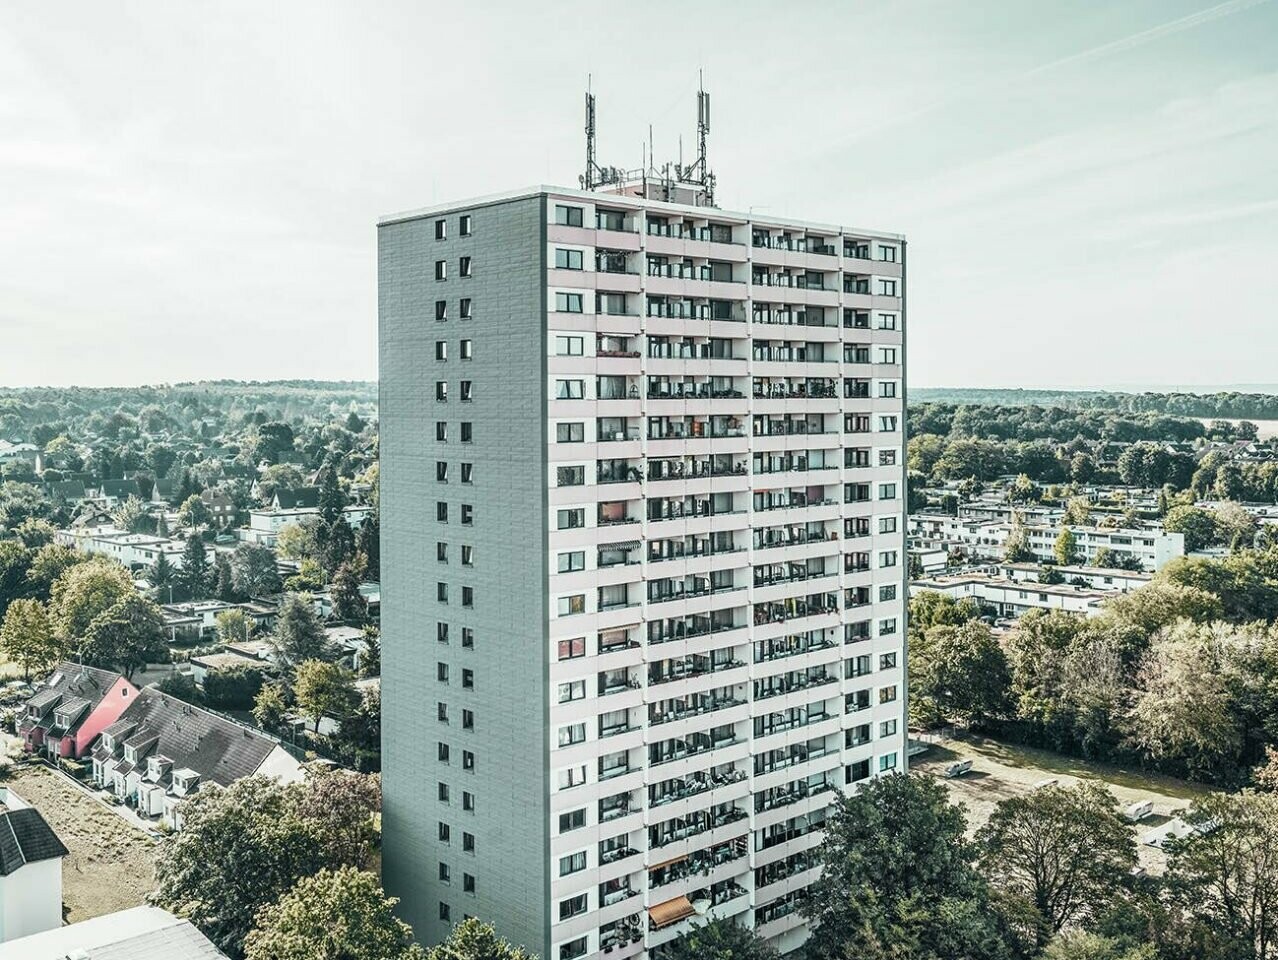 The focus is on the Erftstadt high-rise building, which was renovated with the help of PREFA.